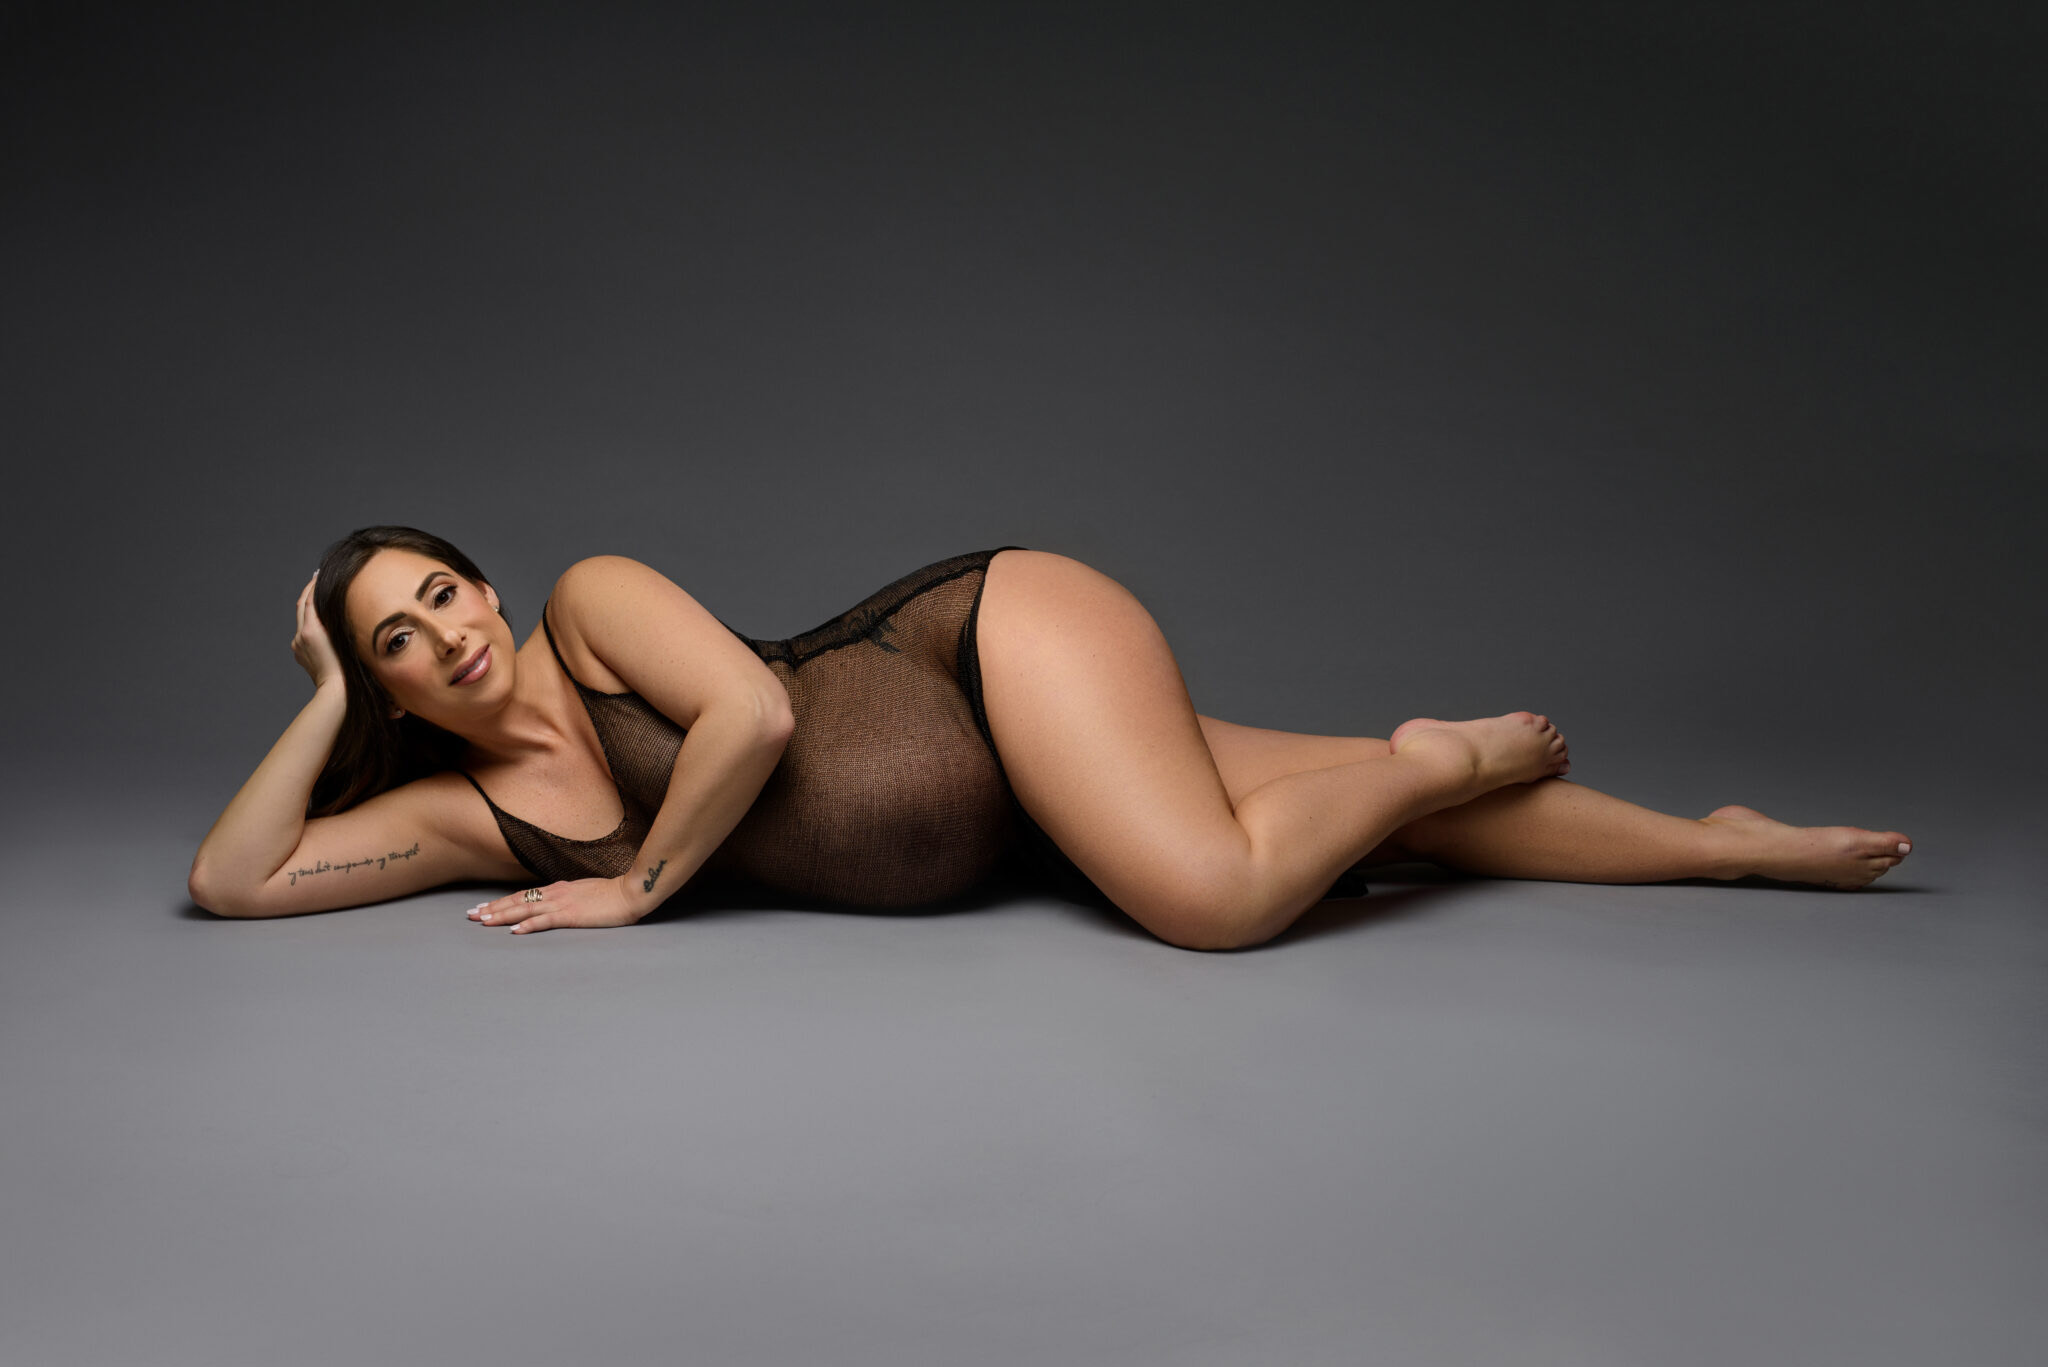 Portrait of a pregnant woman in a sleek sheer black body suit lying on the floor, exuding elegance and confidence.